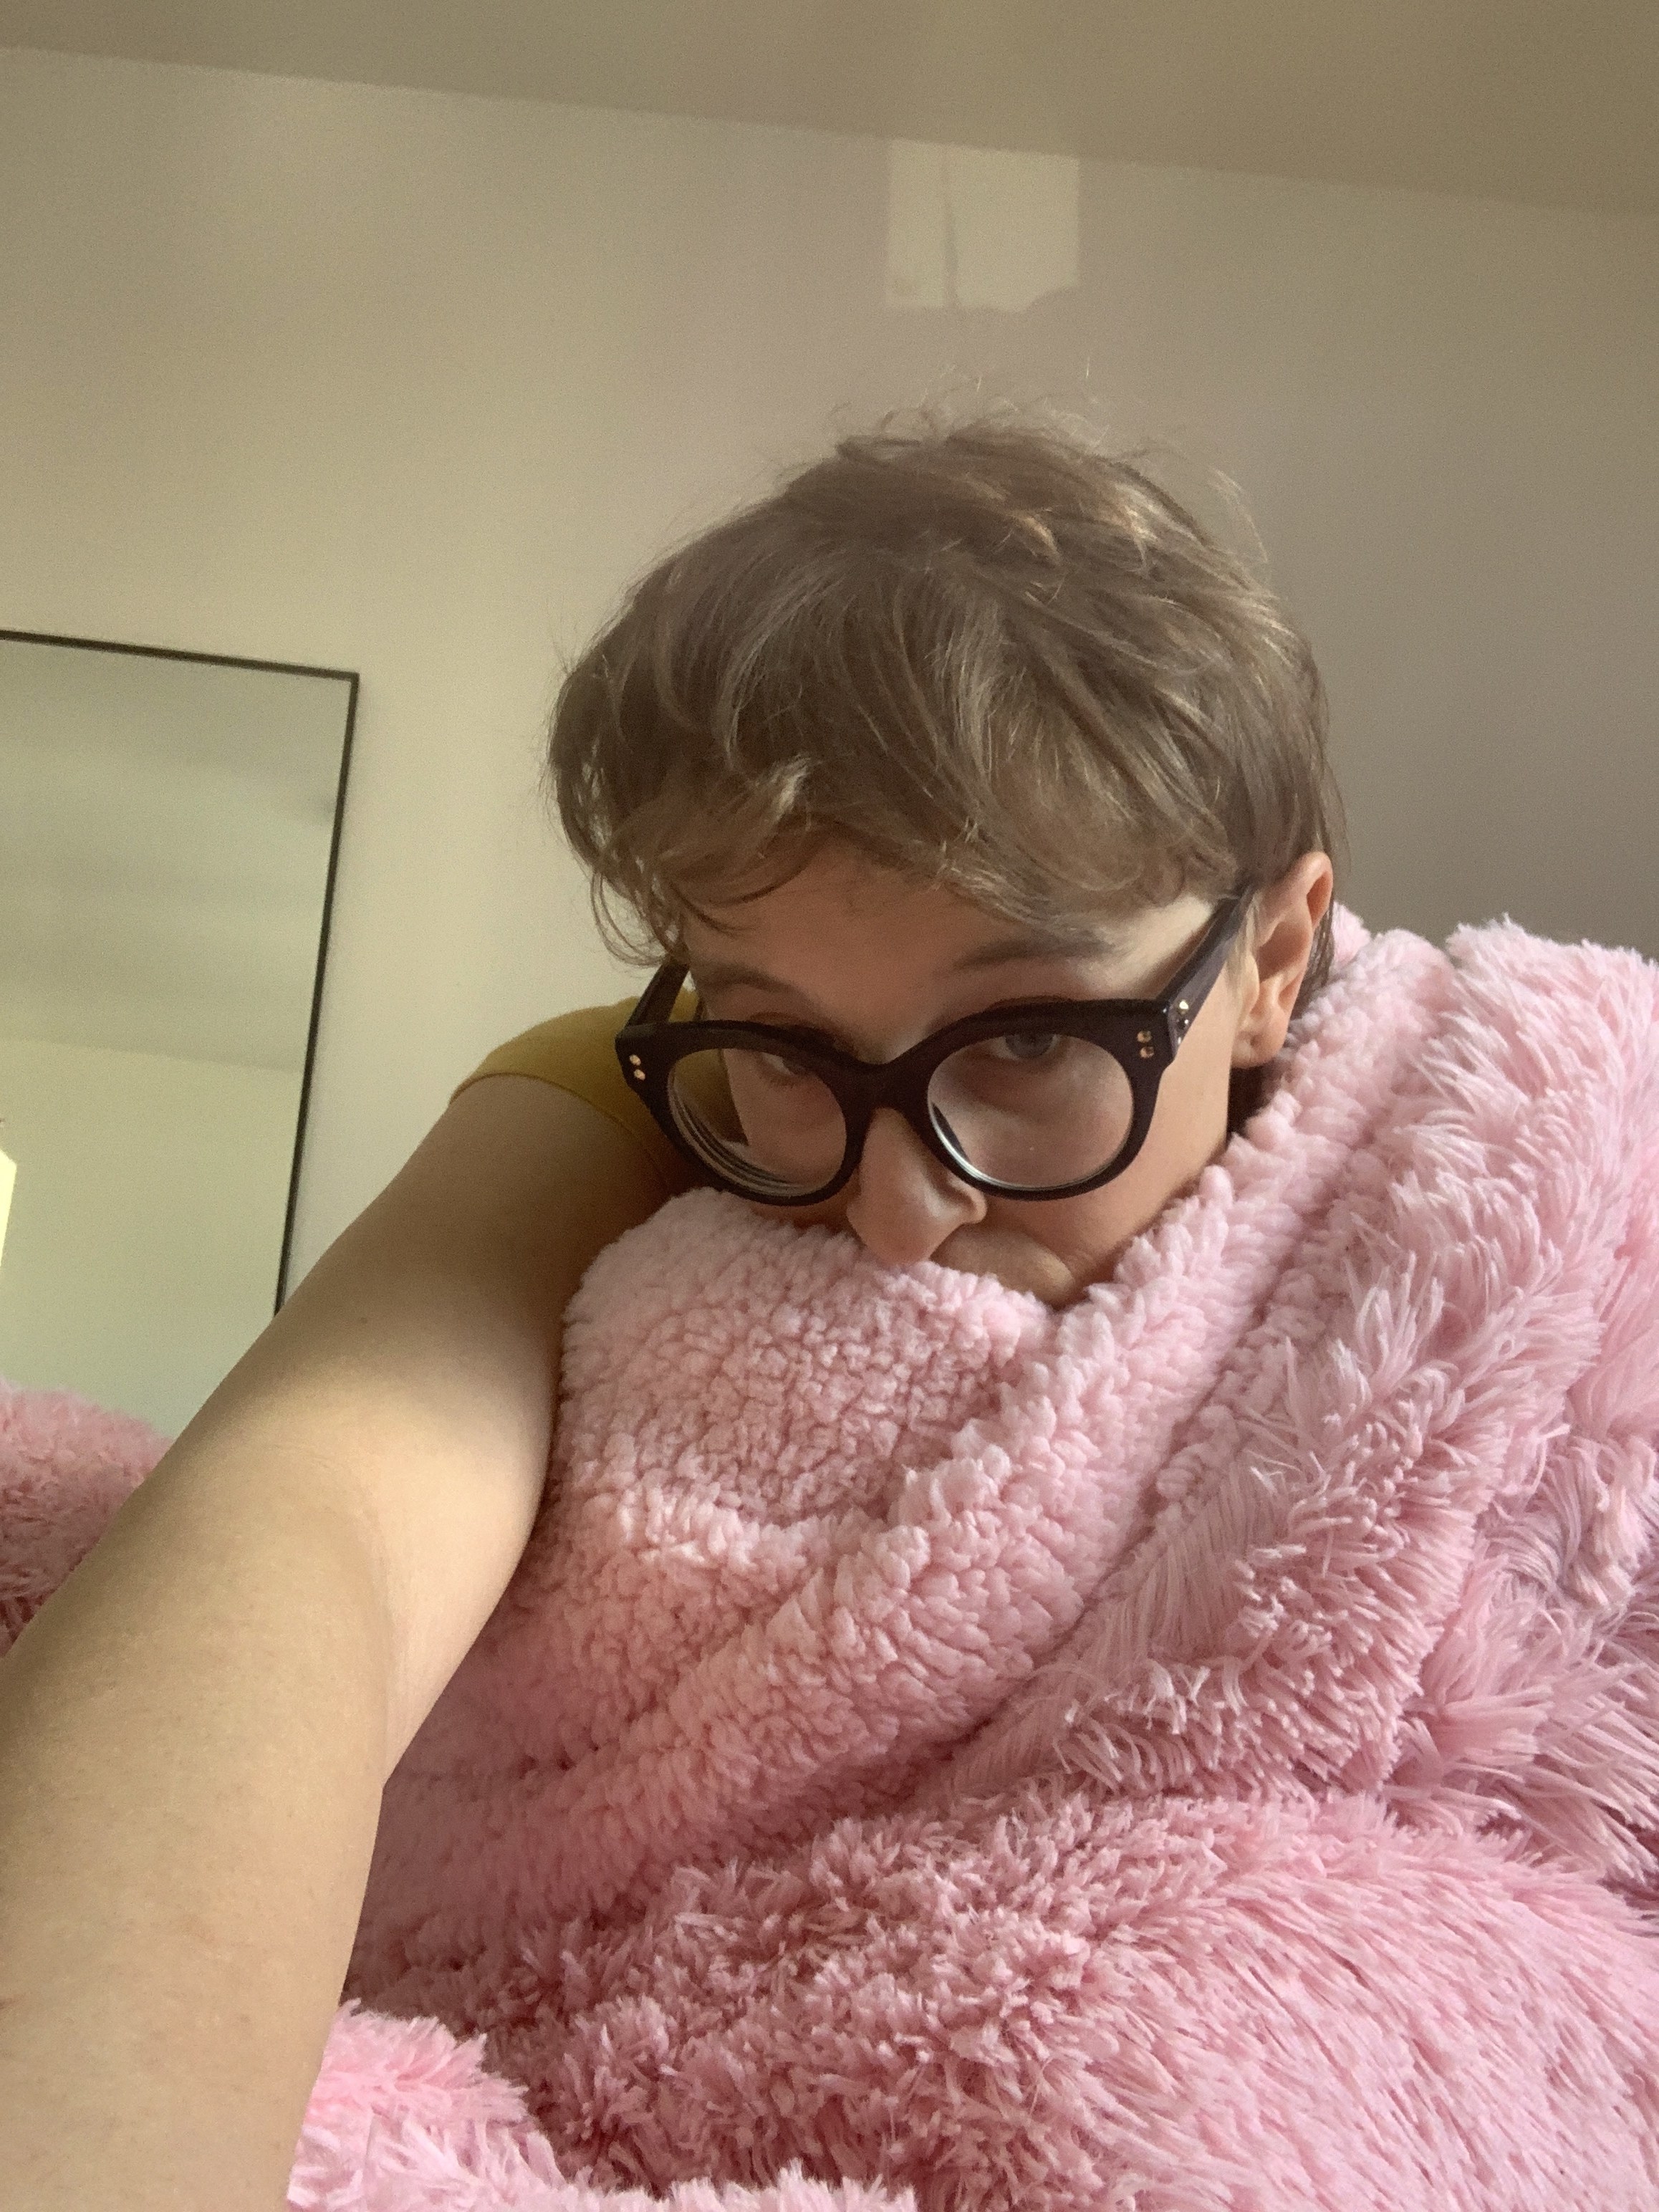 The author under the pink two-sided blanket